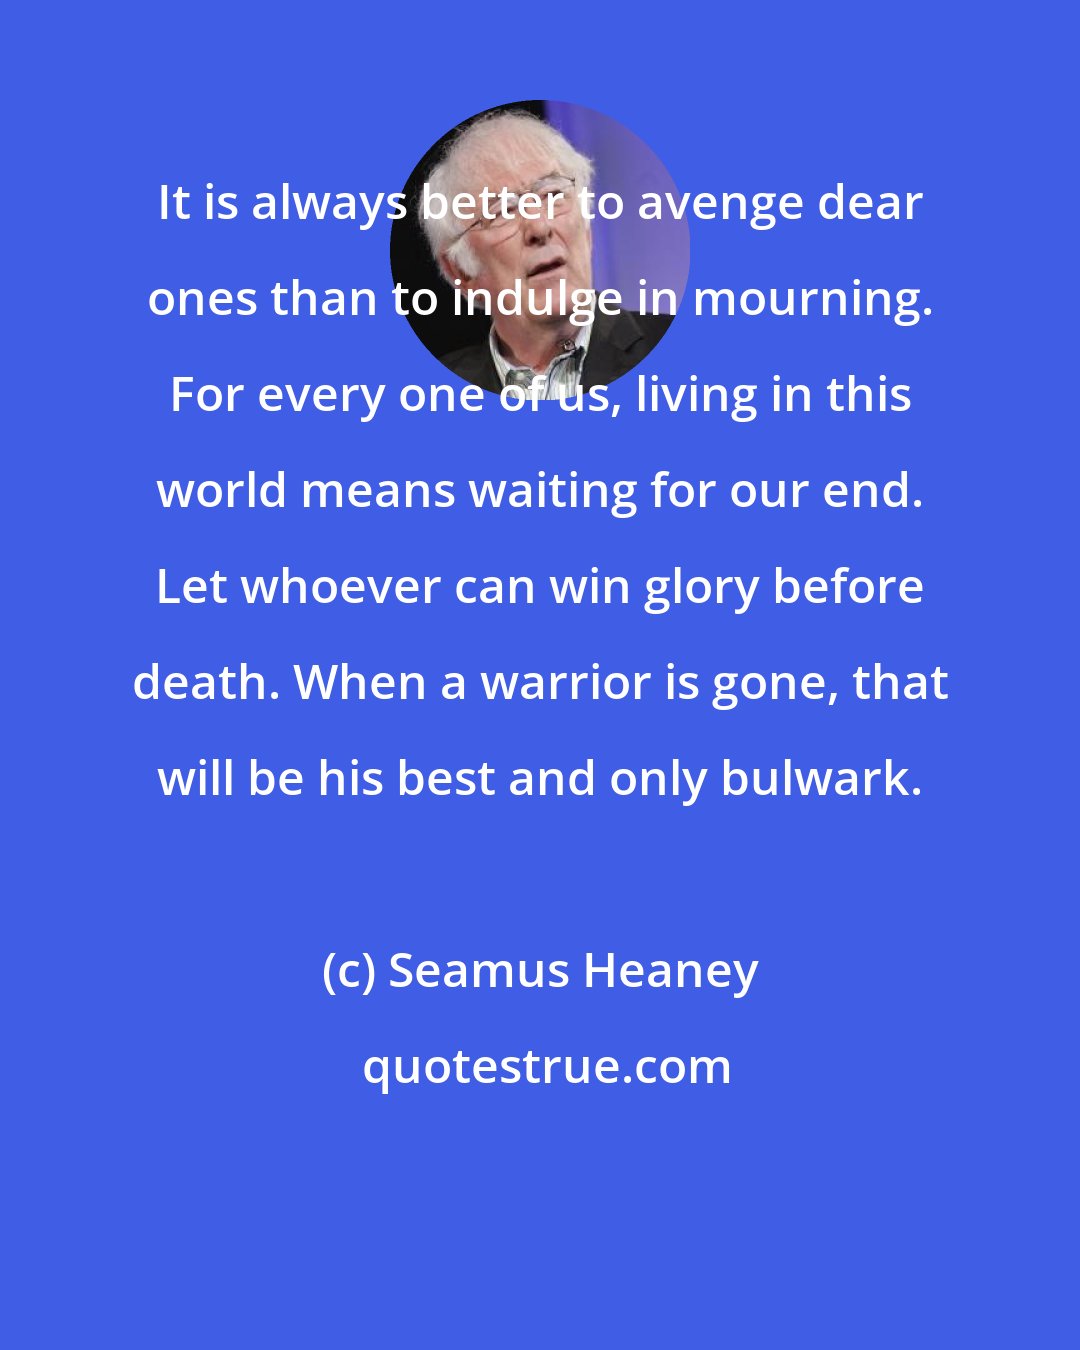 Seamus Heaney: It is always better to avenge dear ones than to indulge in mourning. For every one of us, living in this world means waiting for our end. Let whoever can win glory before death. When a warrior is gone, that will be his best and only bulwark.